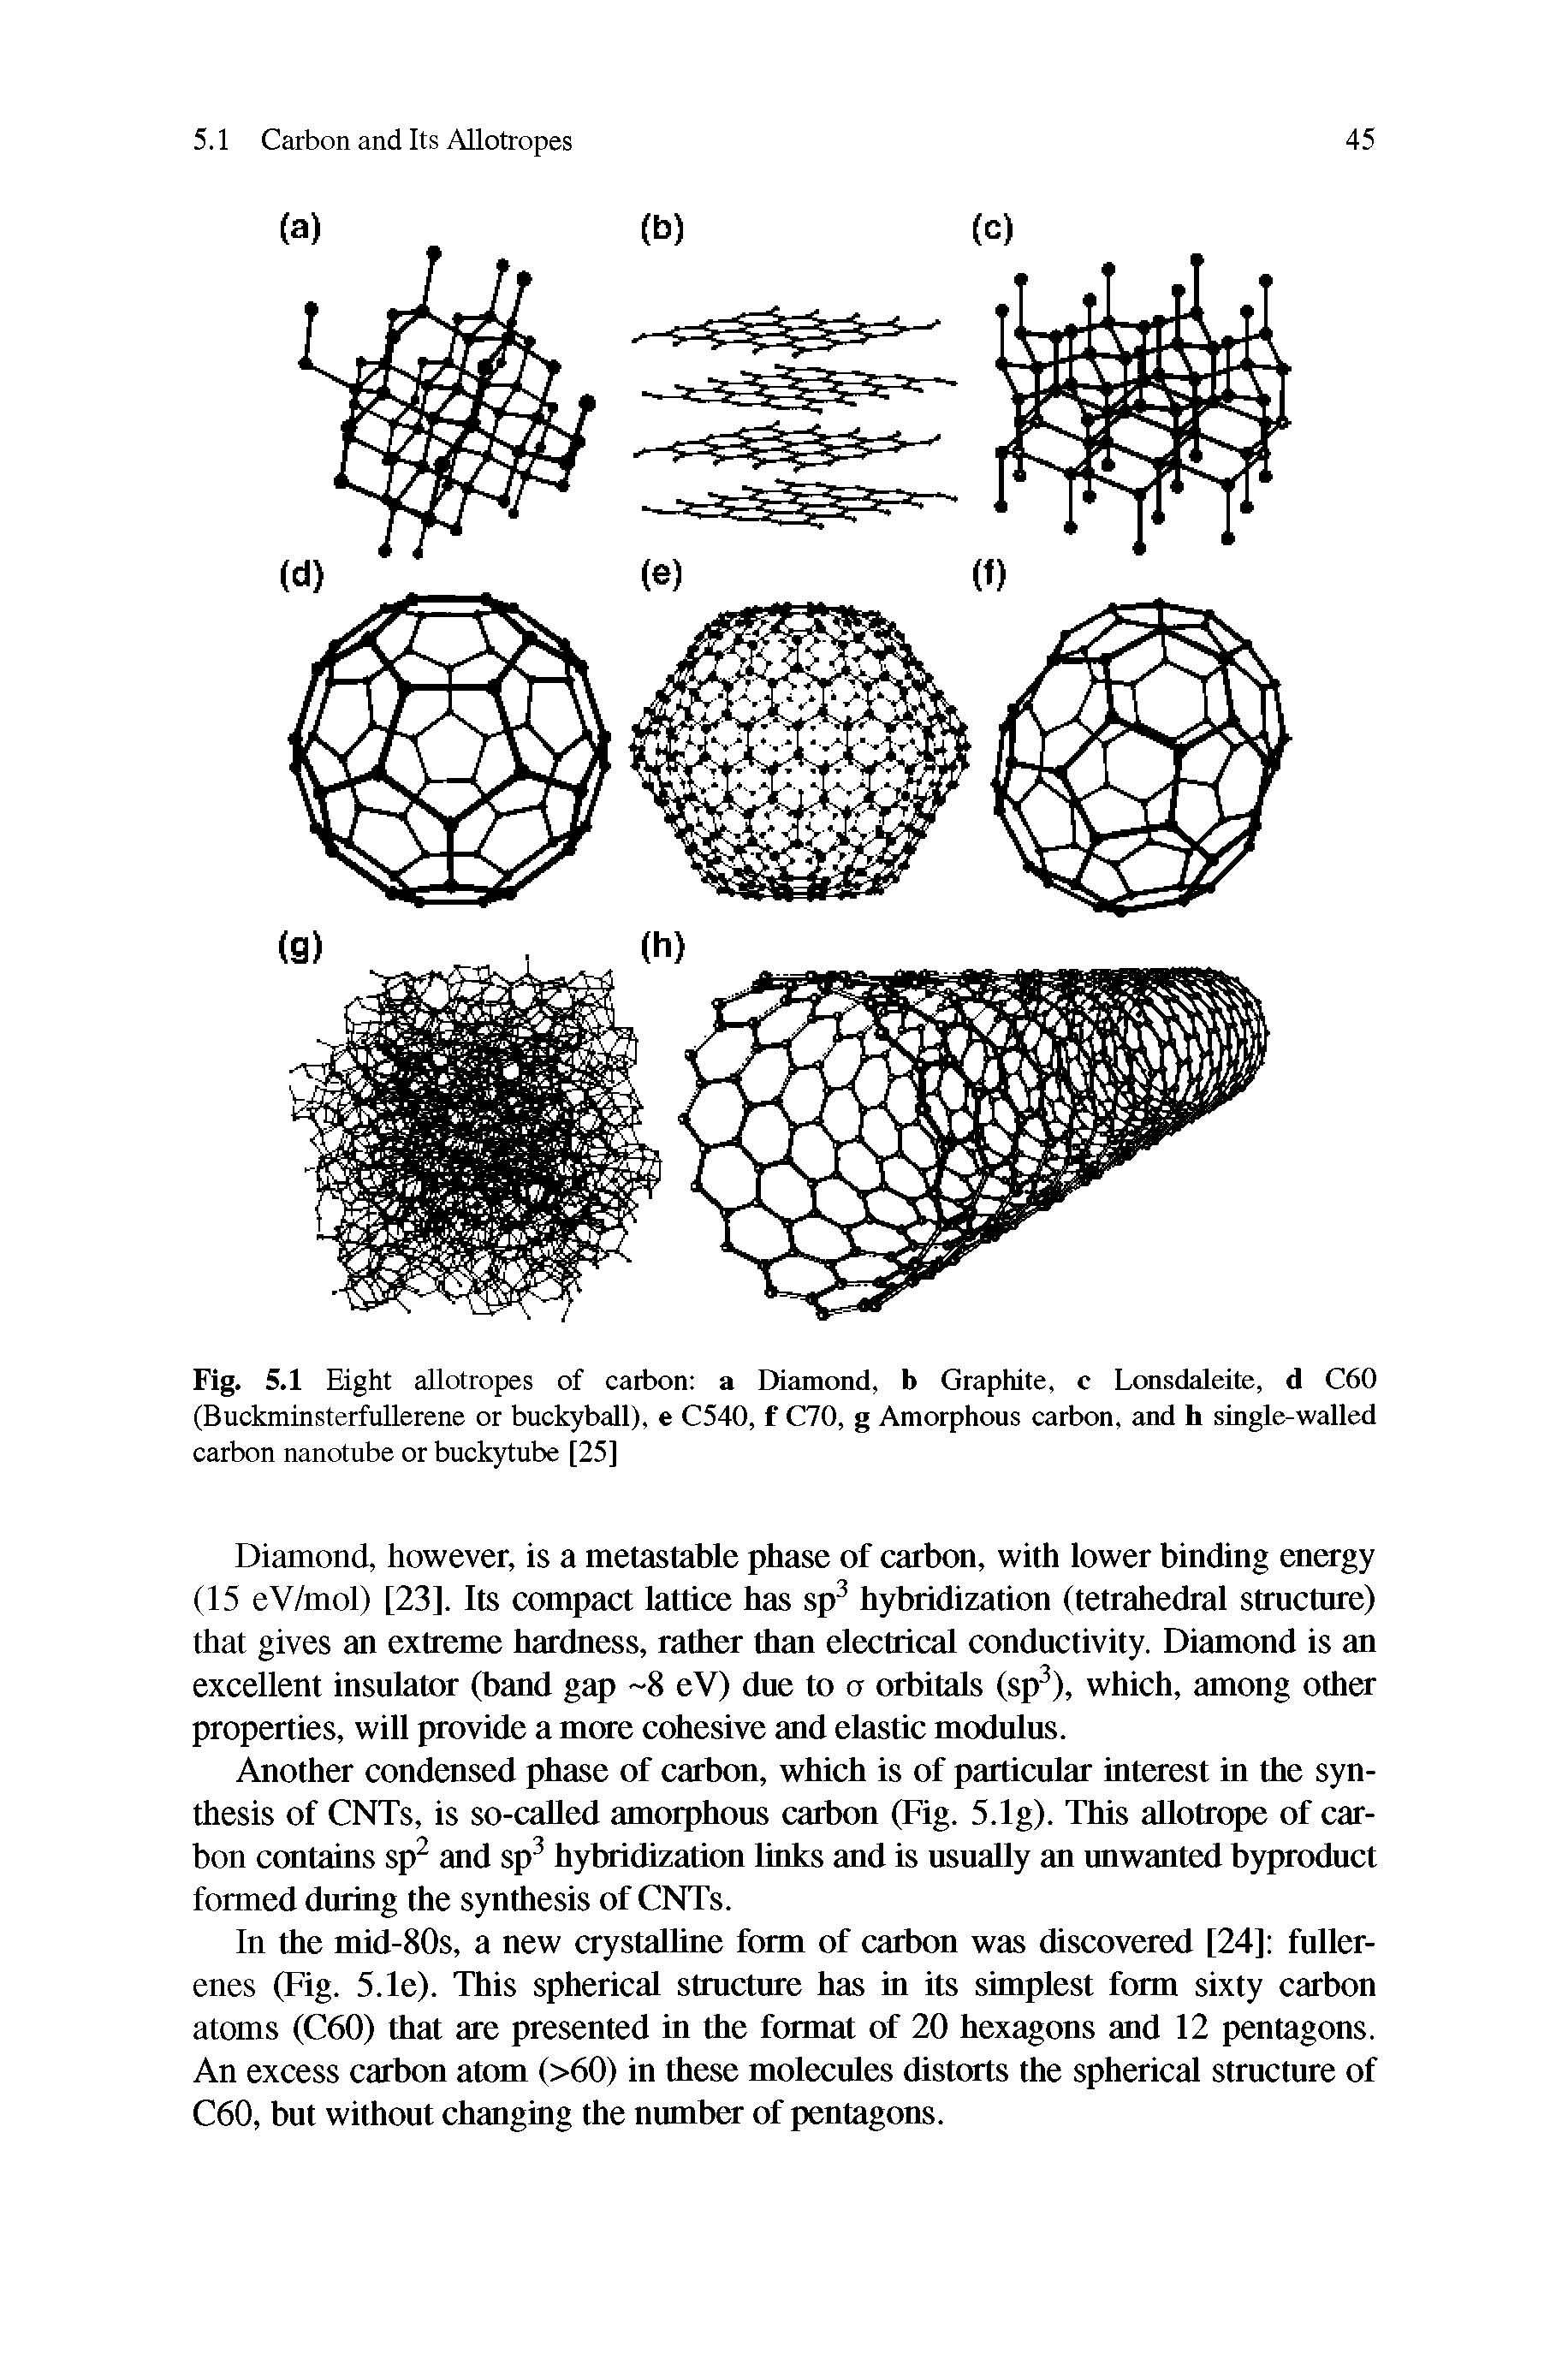 Fig. 5.1 Eight allotropes of carbon a Diamond, b Graphite, c Lonsdaleite, d C60 (Buckminsterfullerene or buckyball), e C540, f C70, g Amorphous carbon, and h single-walled carbon nanotube or buckytube [25]...